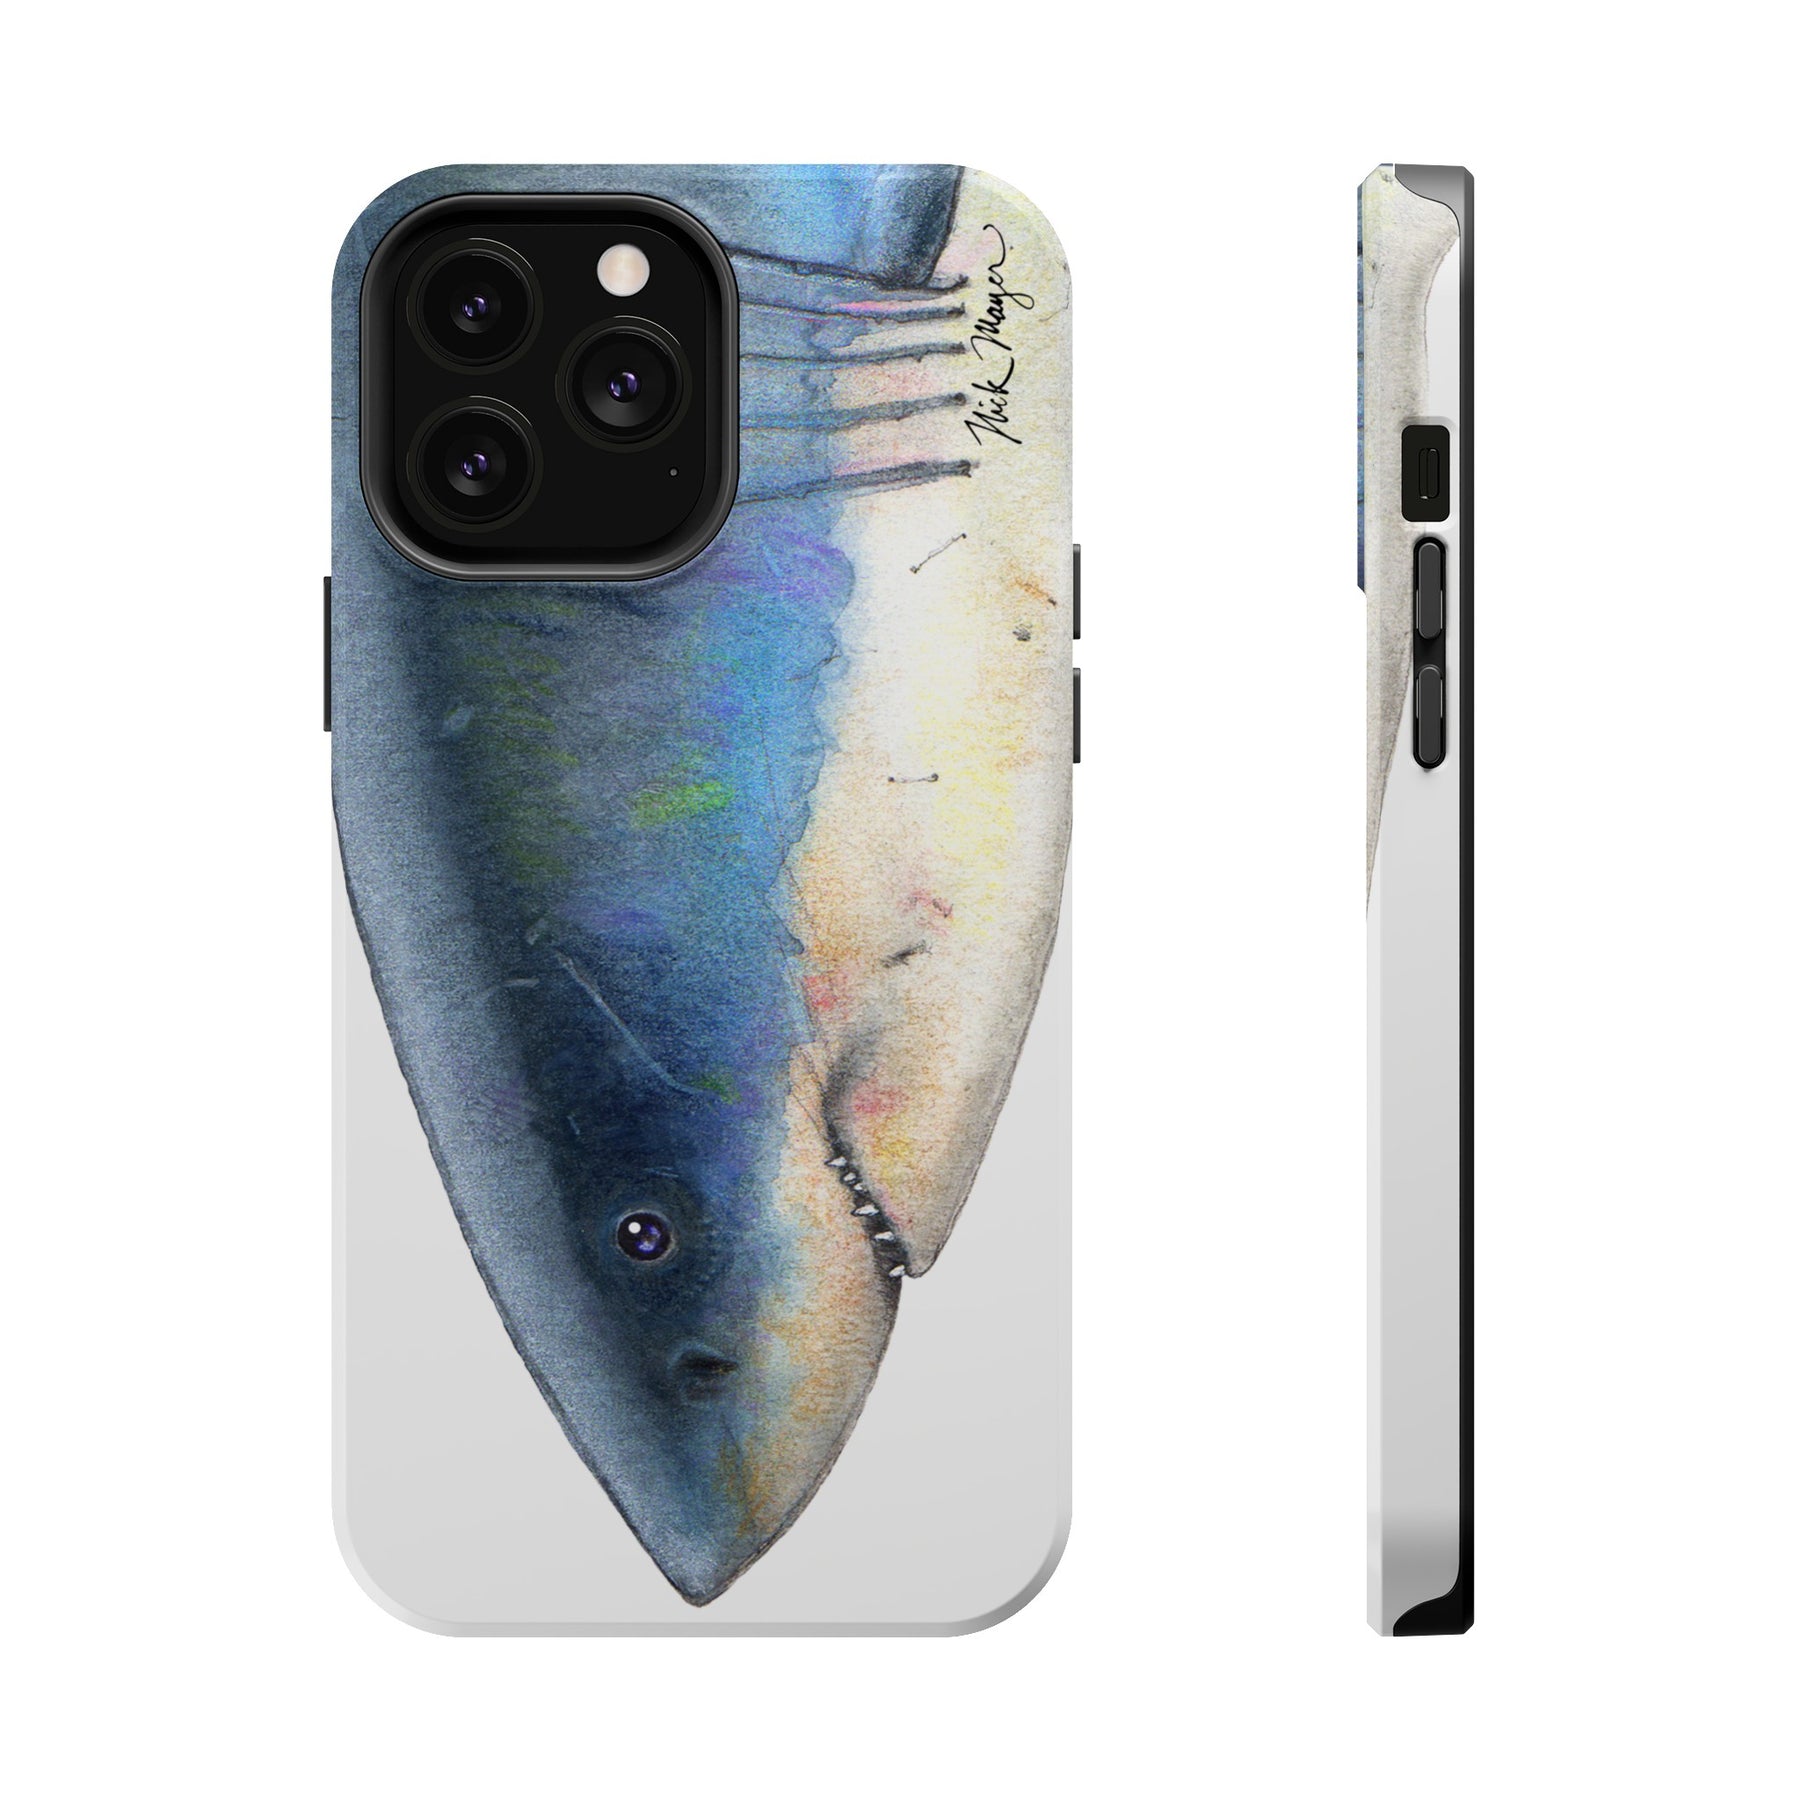 Great White Shark Face MagSafe iPhone Case